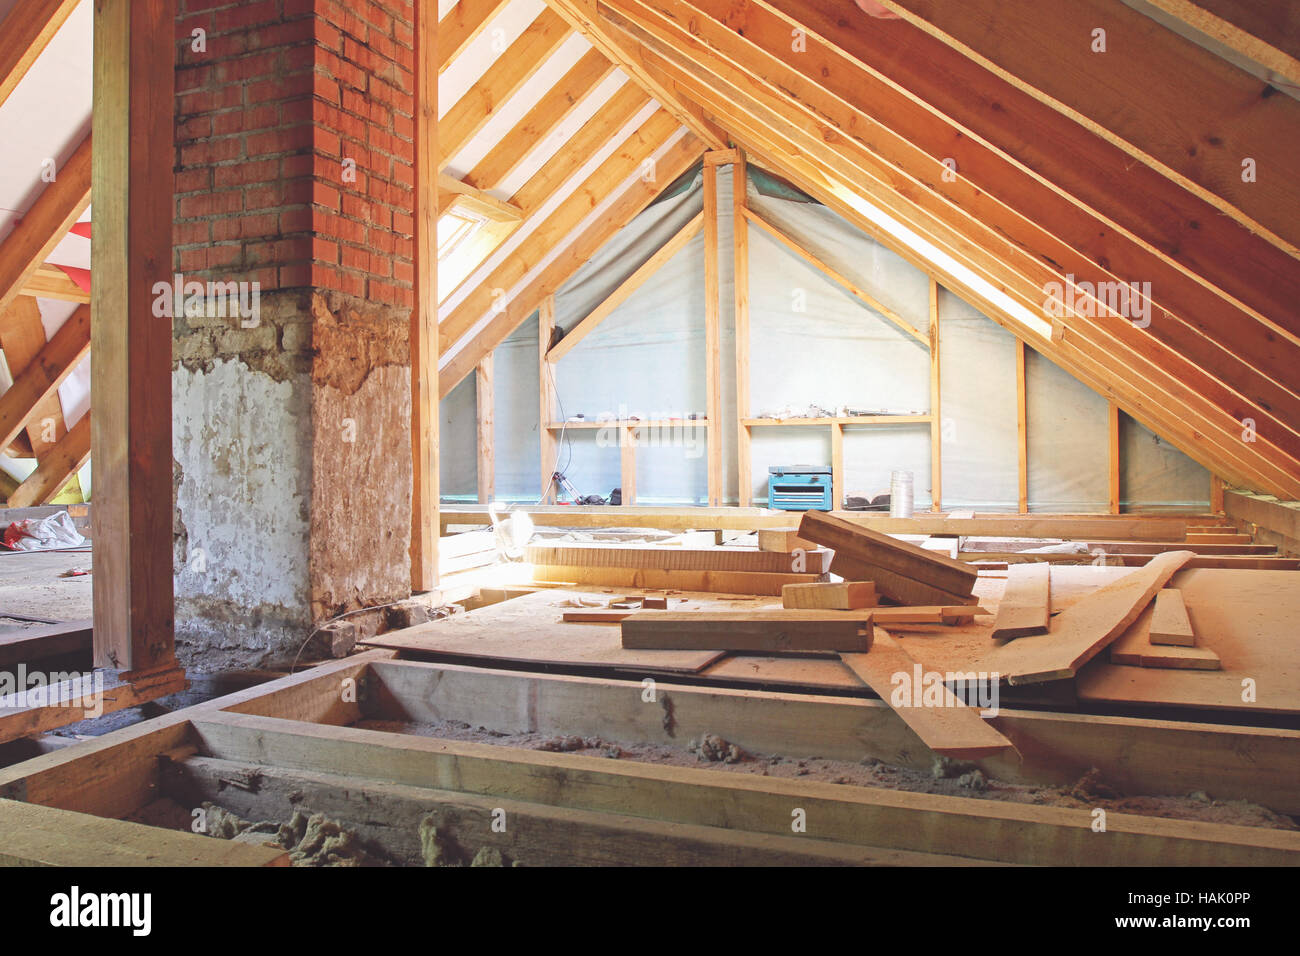 an interior view of a house attic under construction Stock Photo